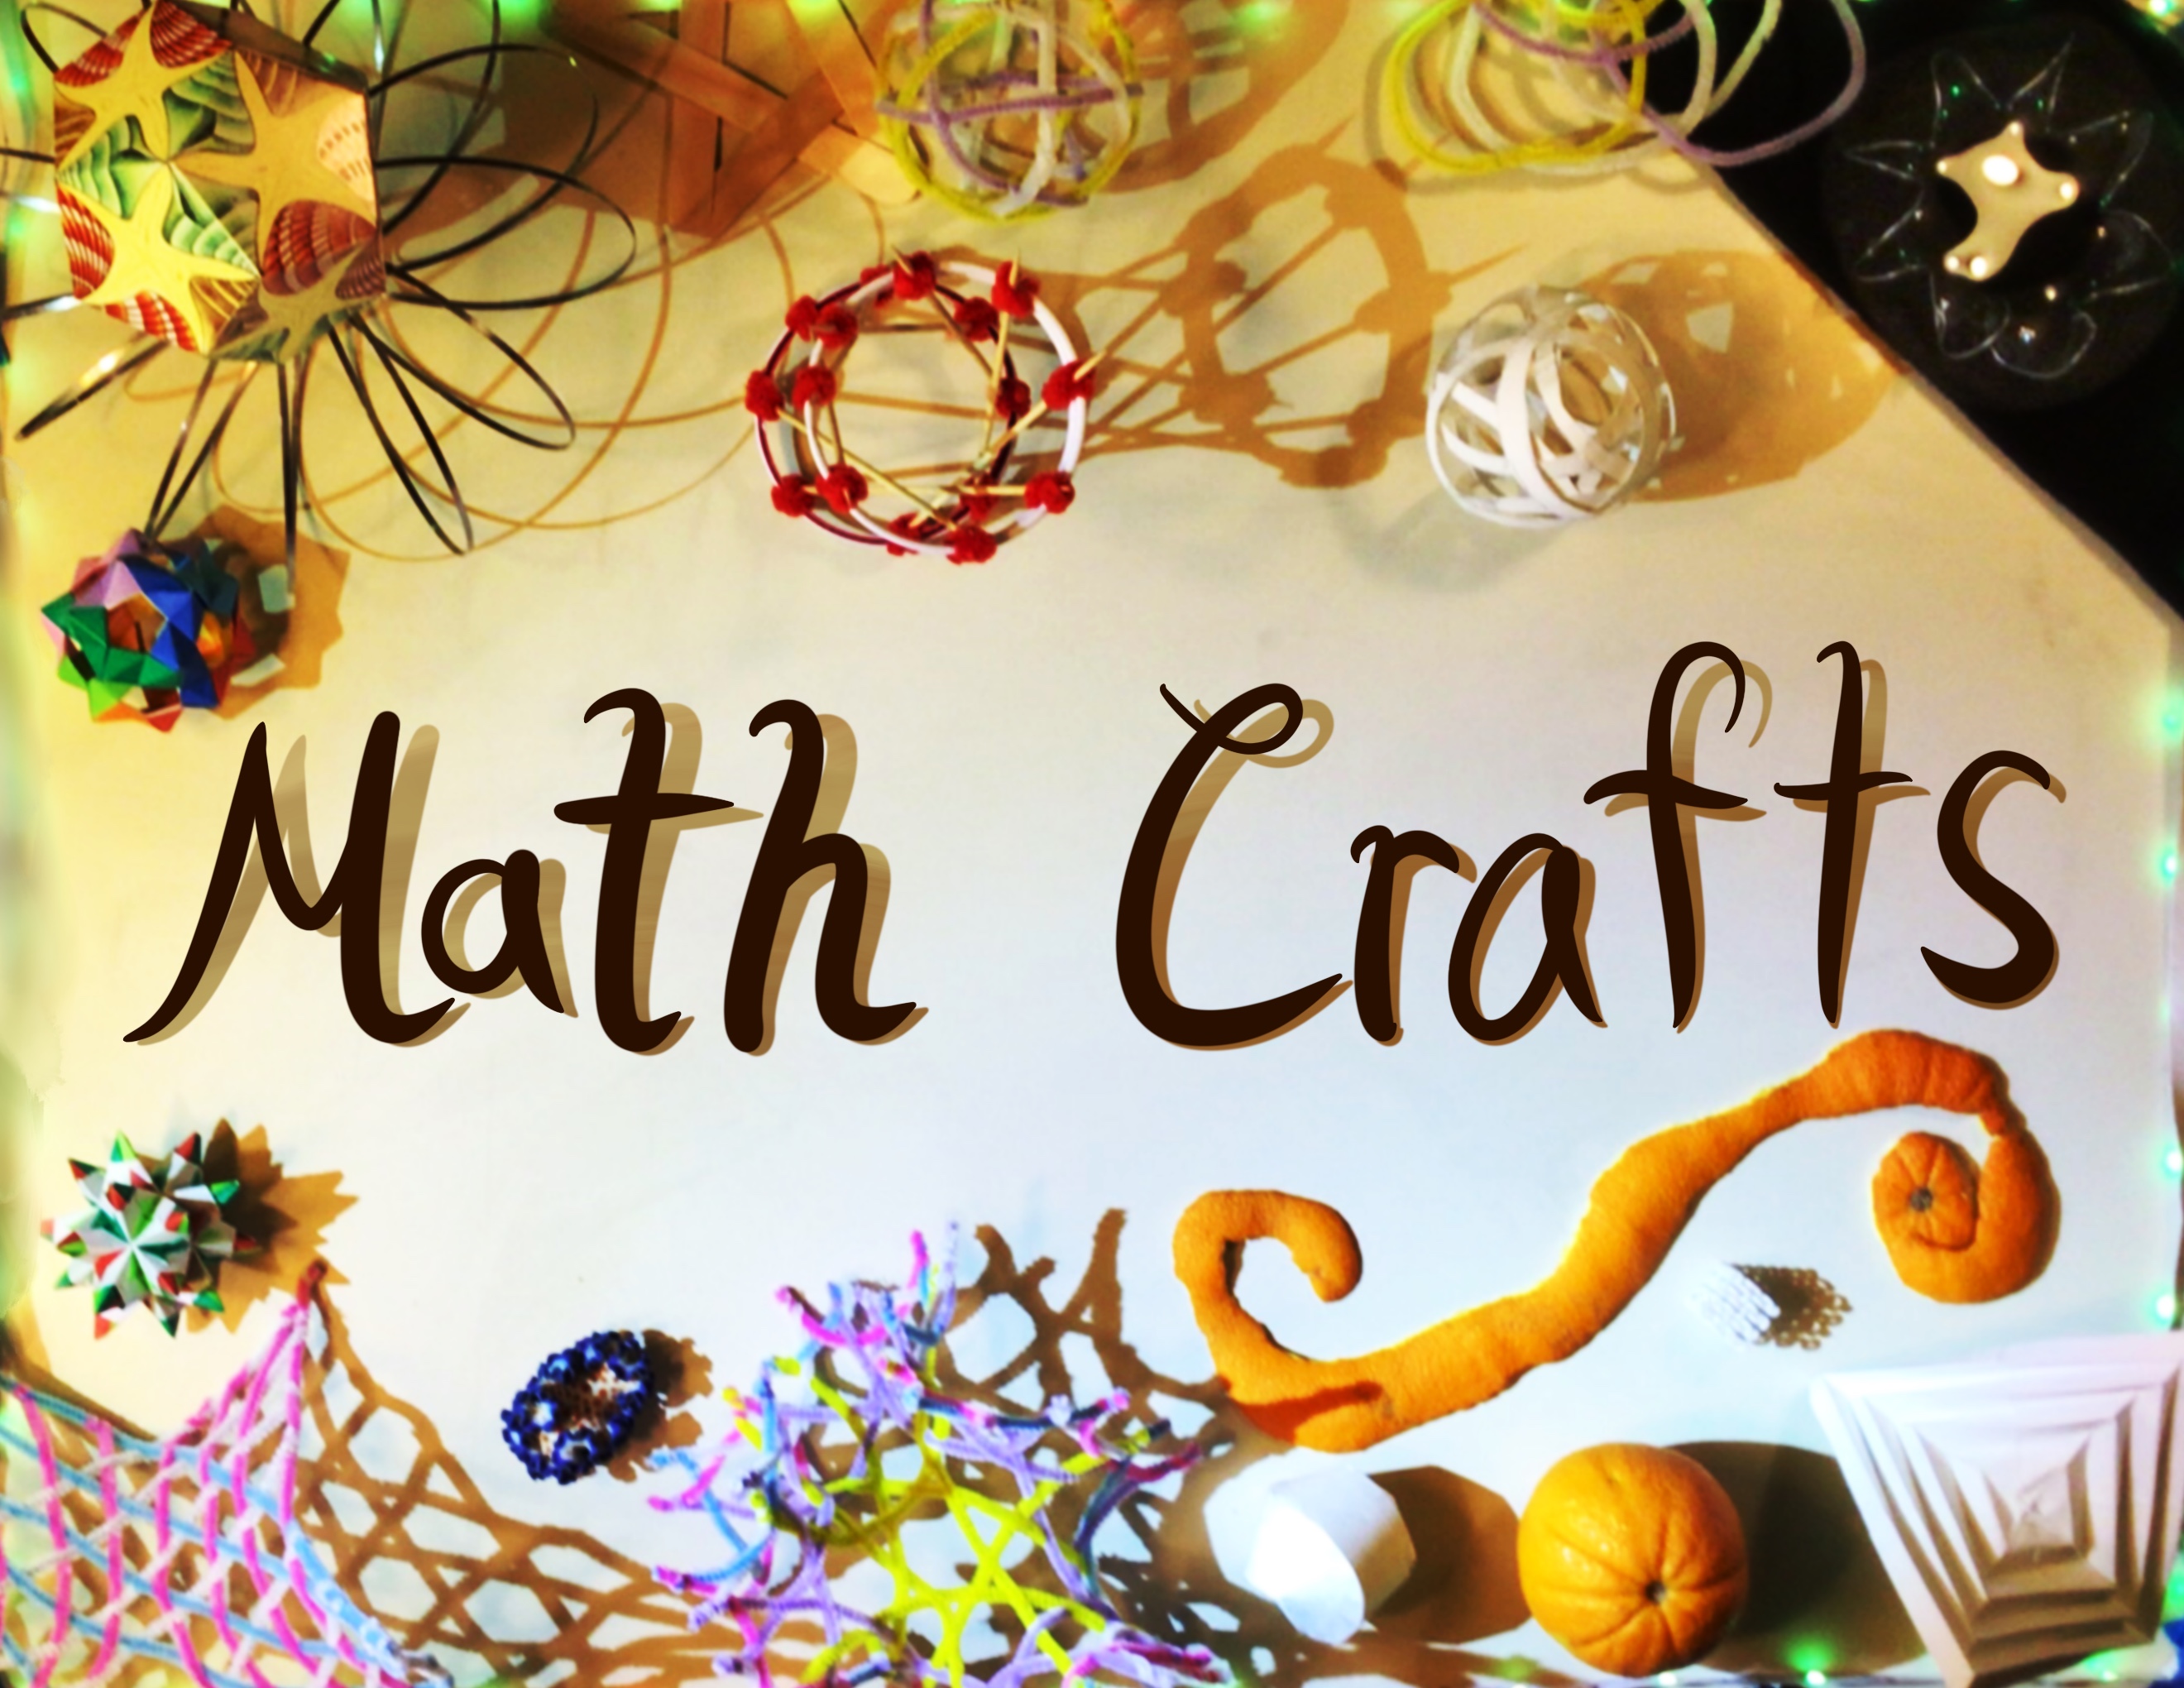  the title of the course, Math crafts, covered with many mathematical objects